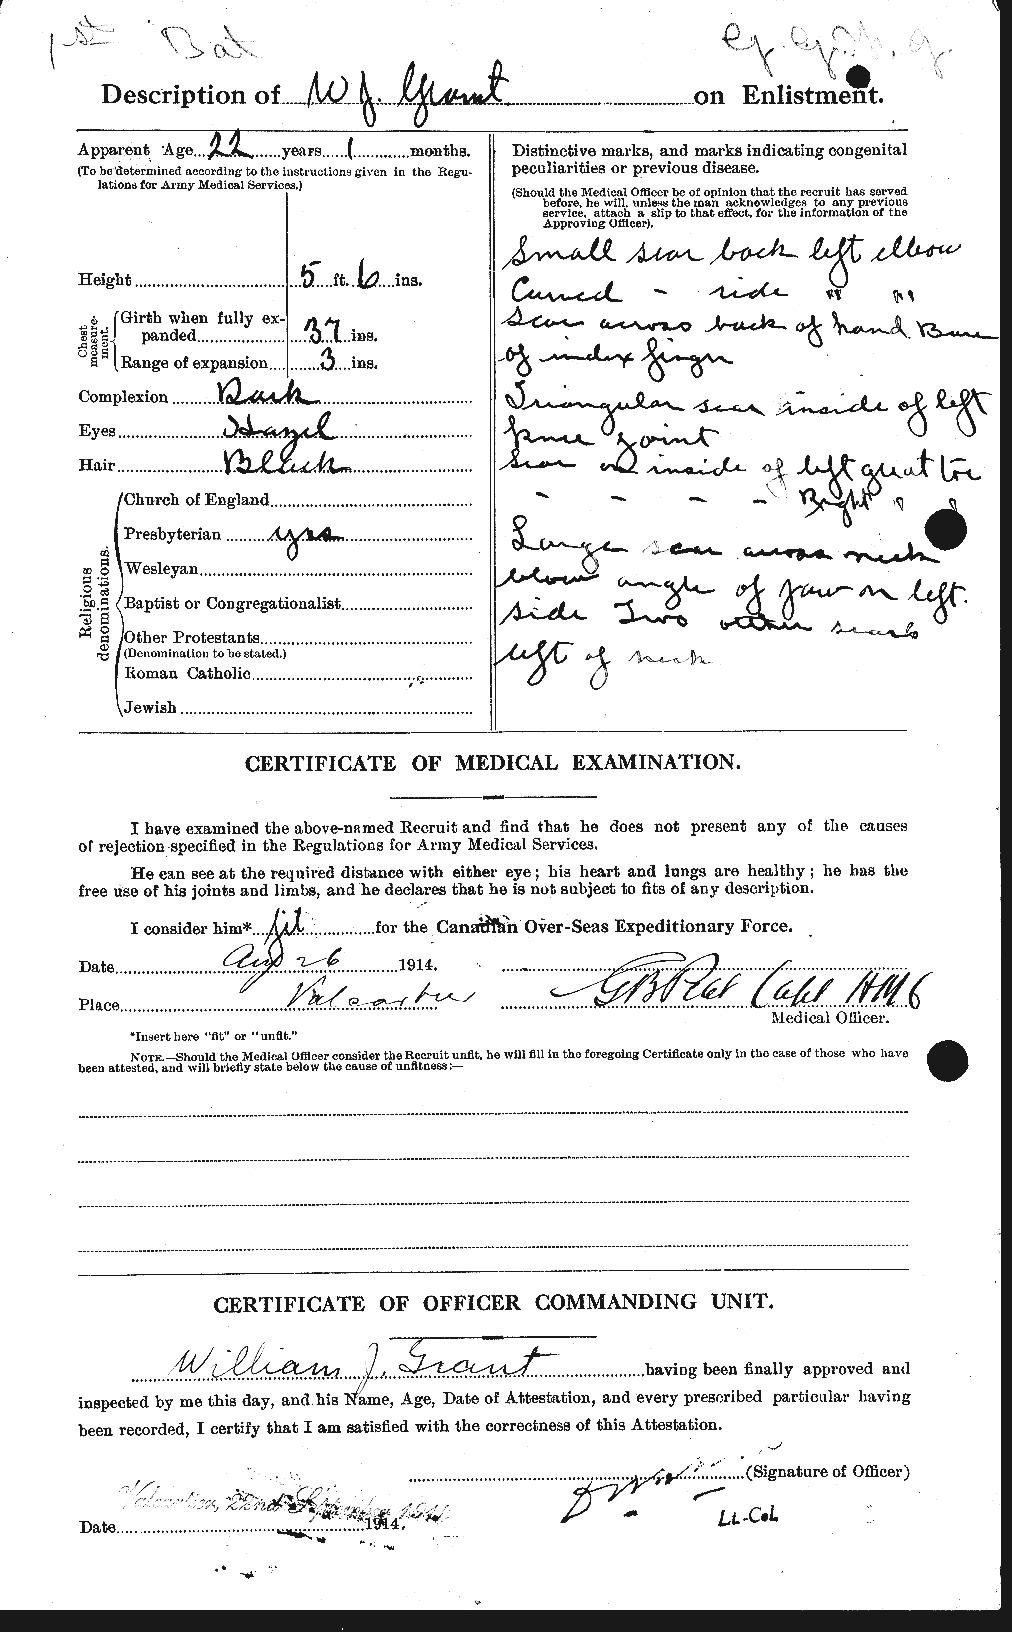 Personnel Records of the First World War - CEF 361270b